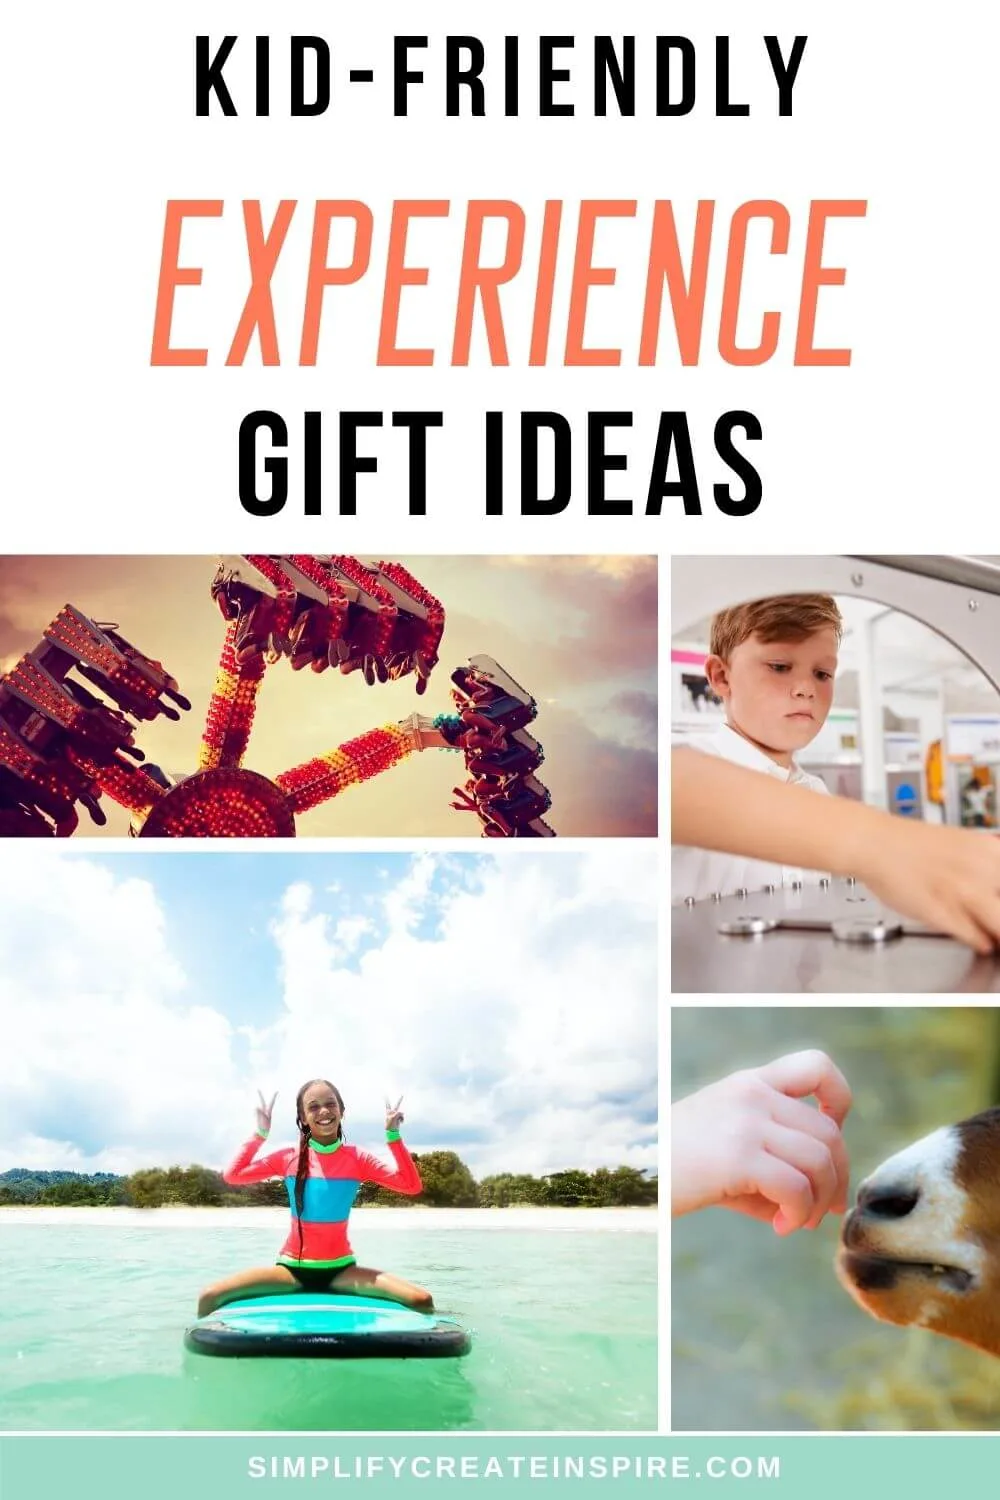 Last-minute experience gifts for kids